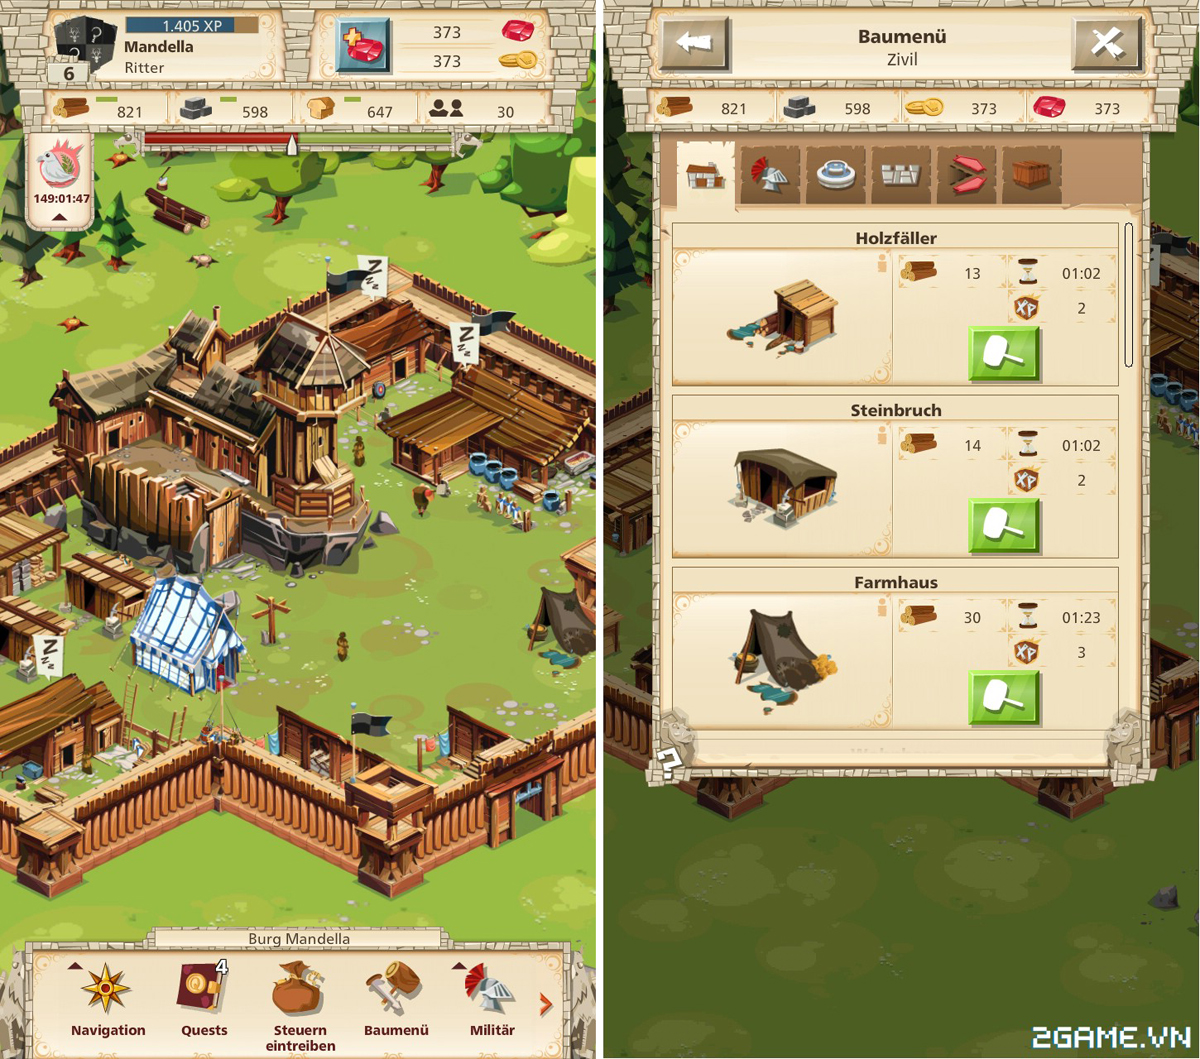 2game-anh-EMPIRE-FOUR-KINGDOMS-mobile-3.jpg (1200×1059)